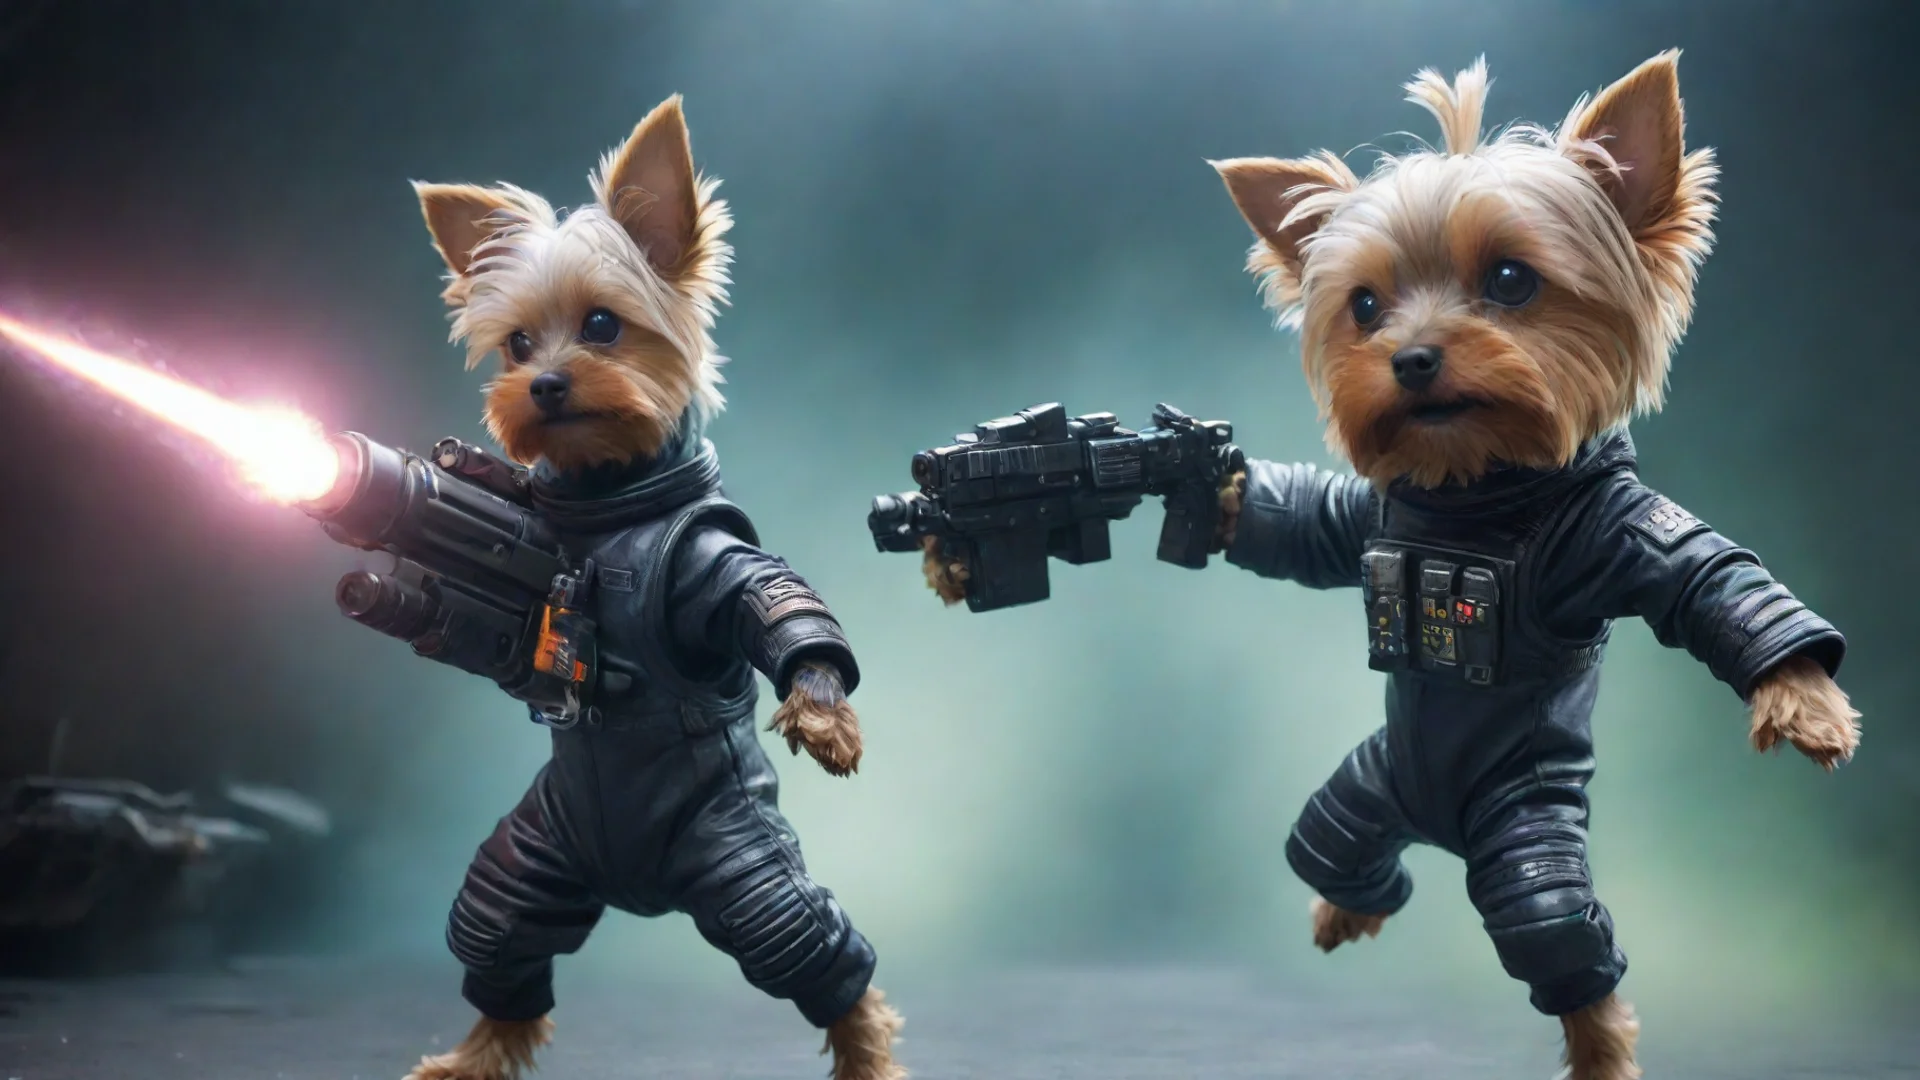 amazing yorkshire terrier in a cyberpunk space suit firing at aliens awesome portrait 2 wide